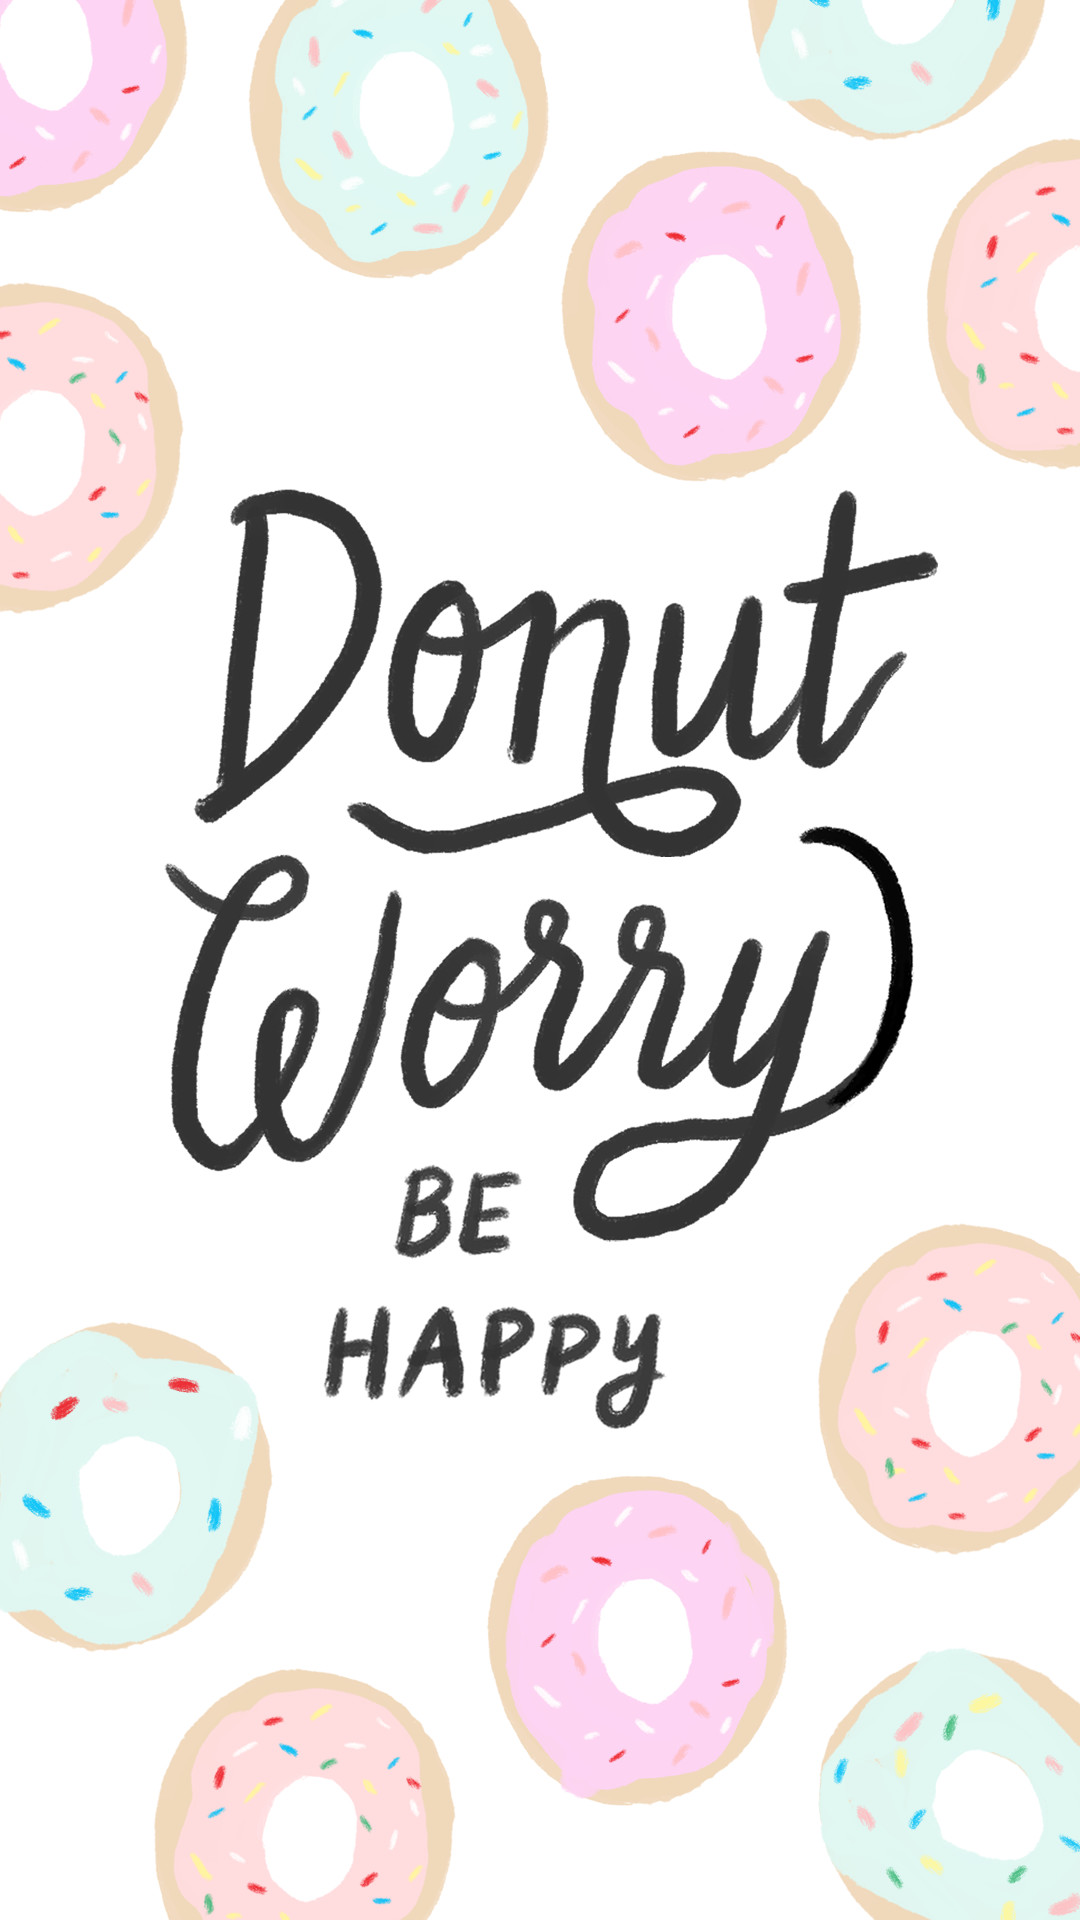 1080x1920 iphone-donut-worry.png (1080Ã1920) | Wallpapers | Pinterest | Wallpaper,  Donuts and Phone